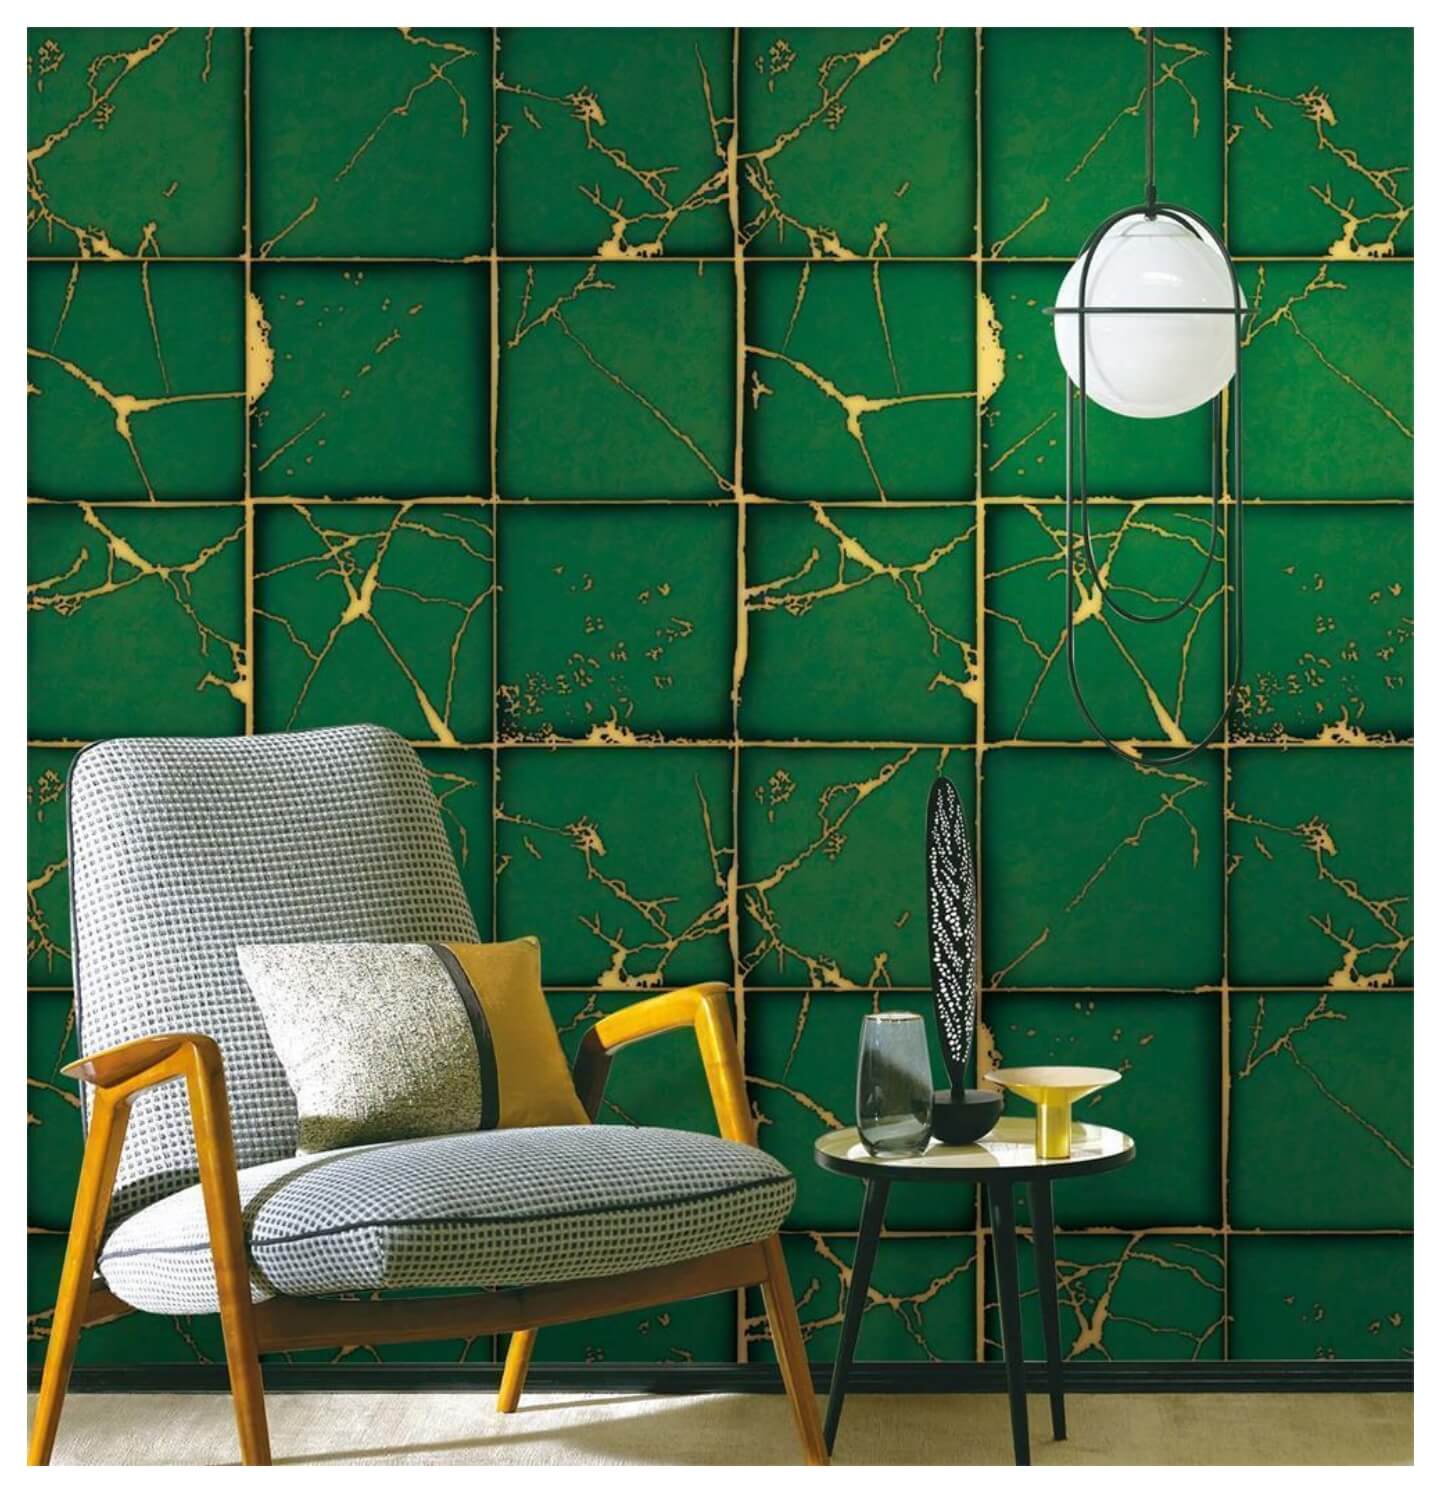 Beautiful Color 3D Design Wallpaper Better choice For Living Area, Bedroom, kids room, Office Durable PVC Wallpapers (23)